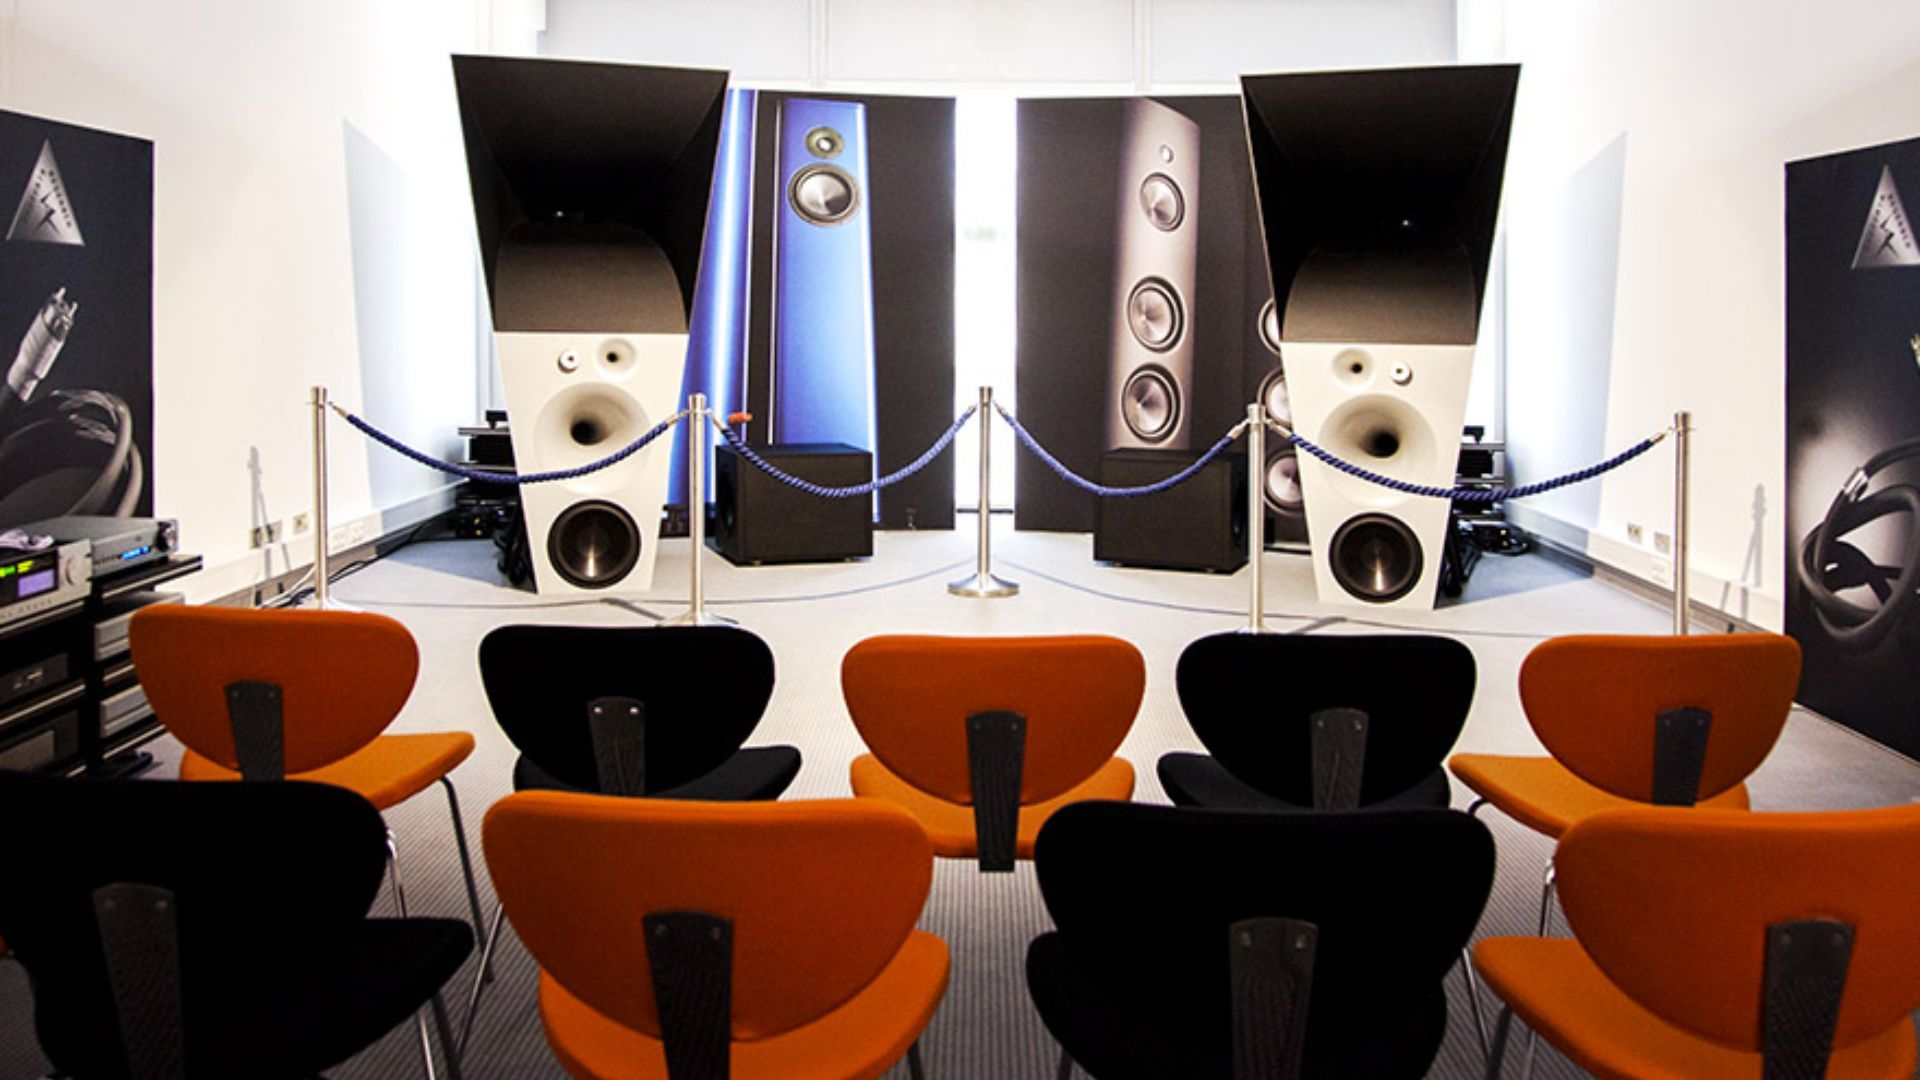  Magico most expensive speakers